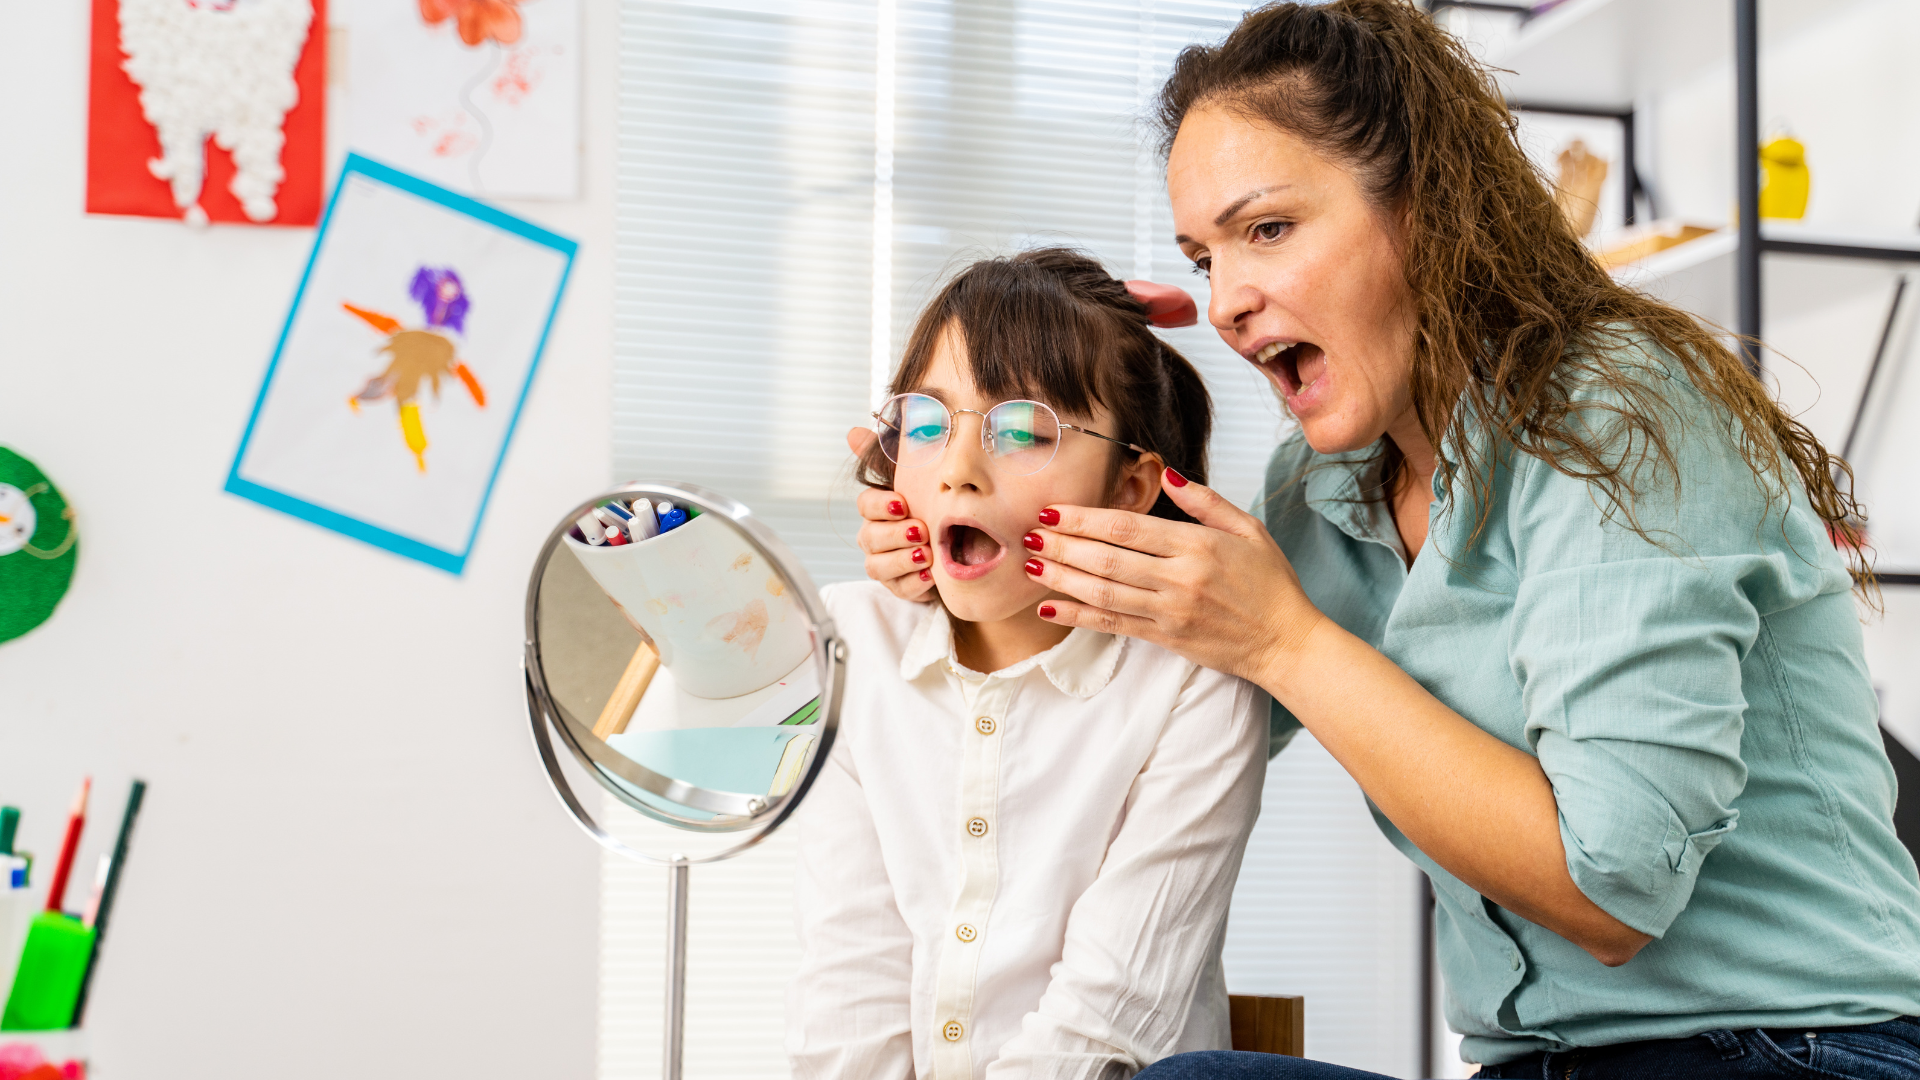 Speech pathologist helping young female patient